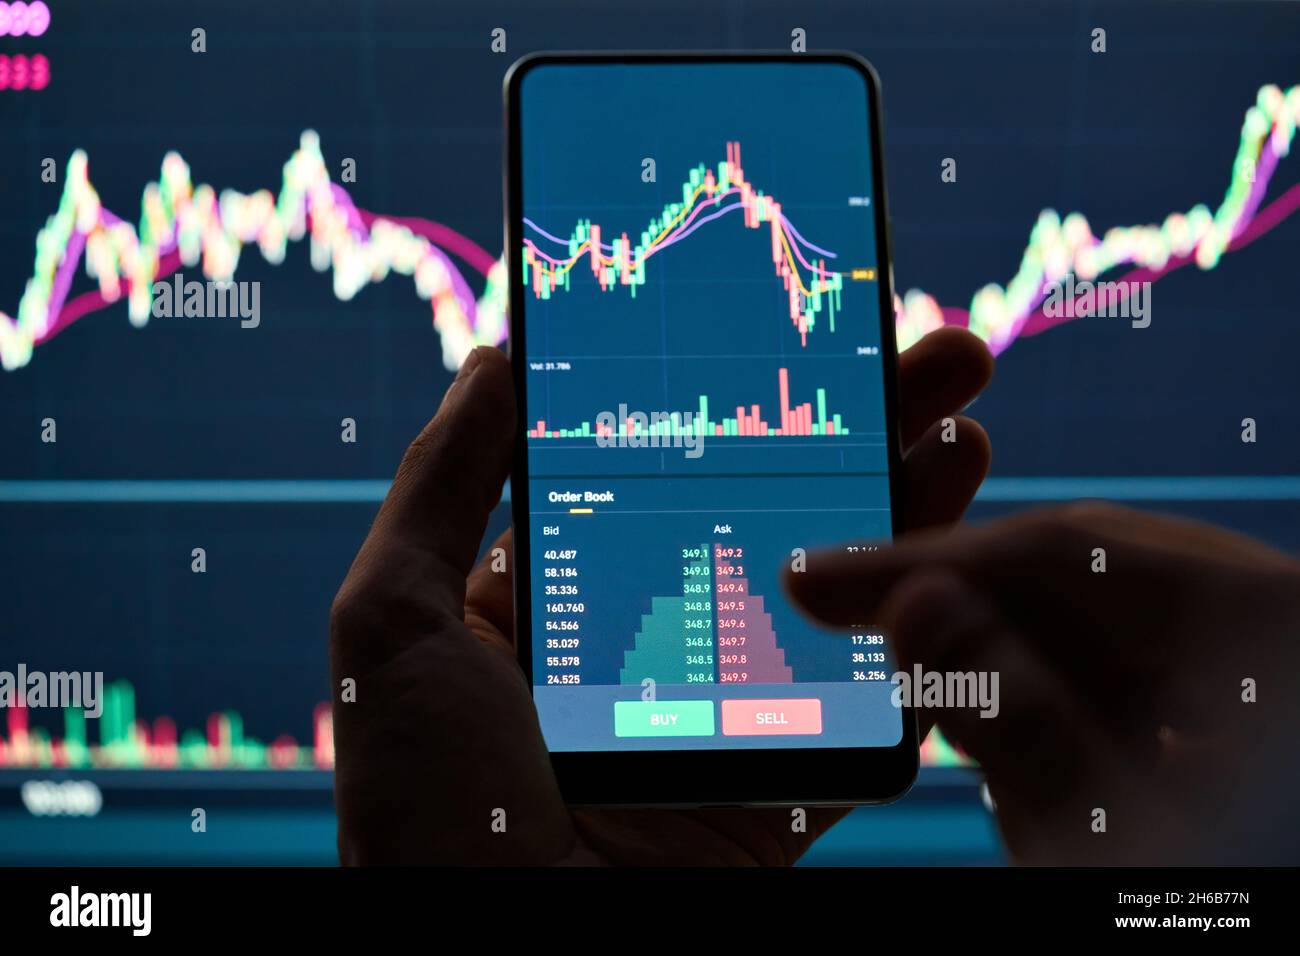 Crypto investor holding phone buying selling stock trading order in app. Stock Photo